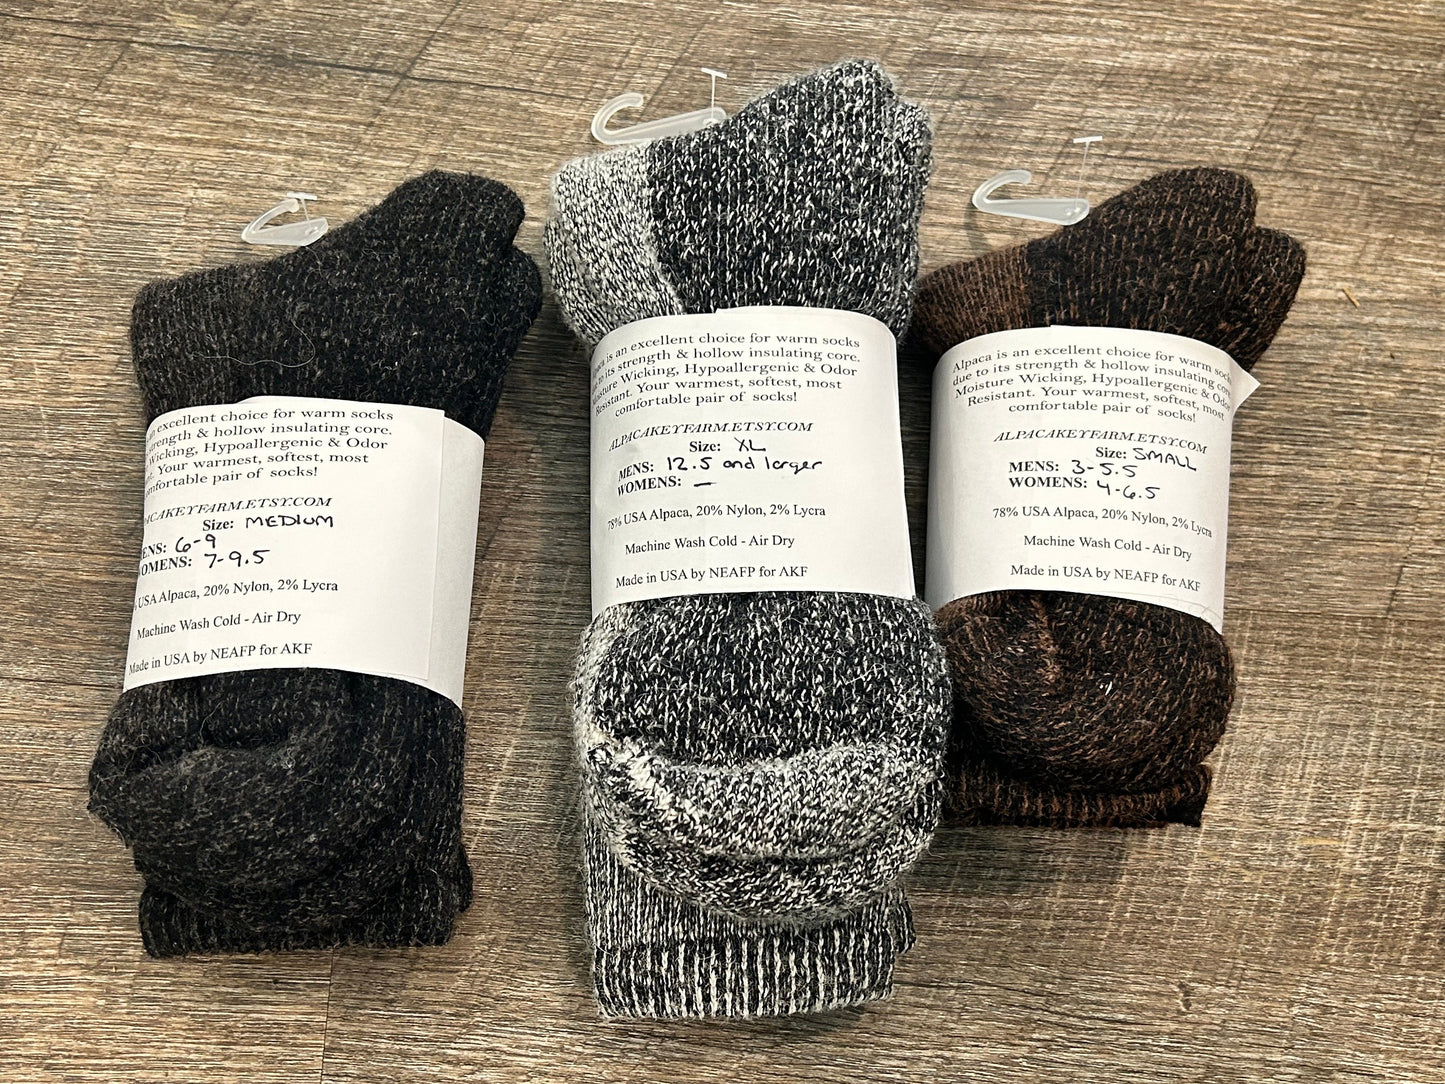 Alpaca Survival Socks, Thick Wool Socks for Men, Boot Socks Women, Hiking Gifts for him, Cozy Gifts for Mom, Outdoor Enthusiast Gift